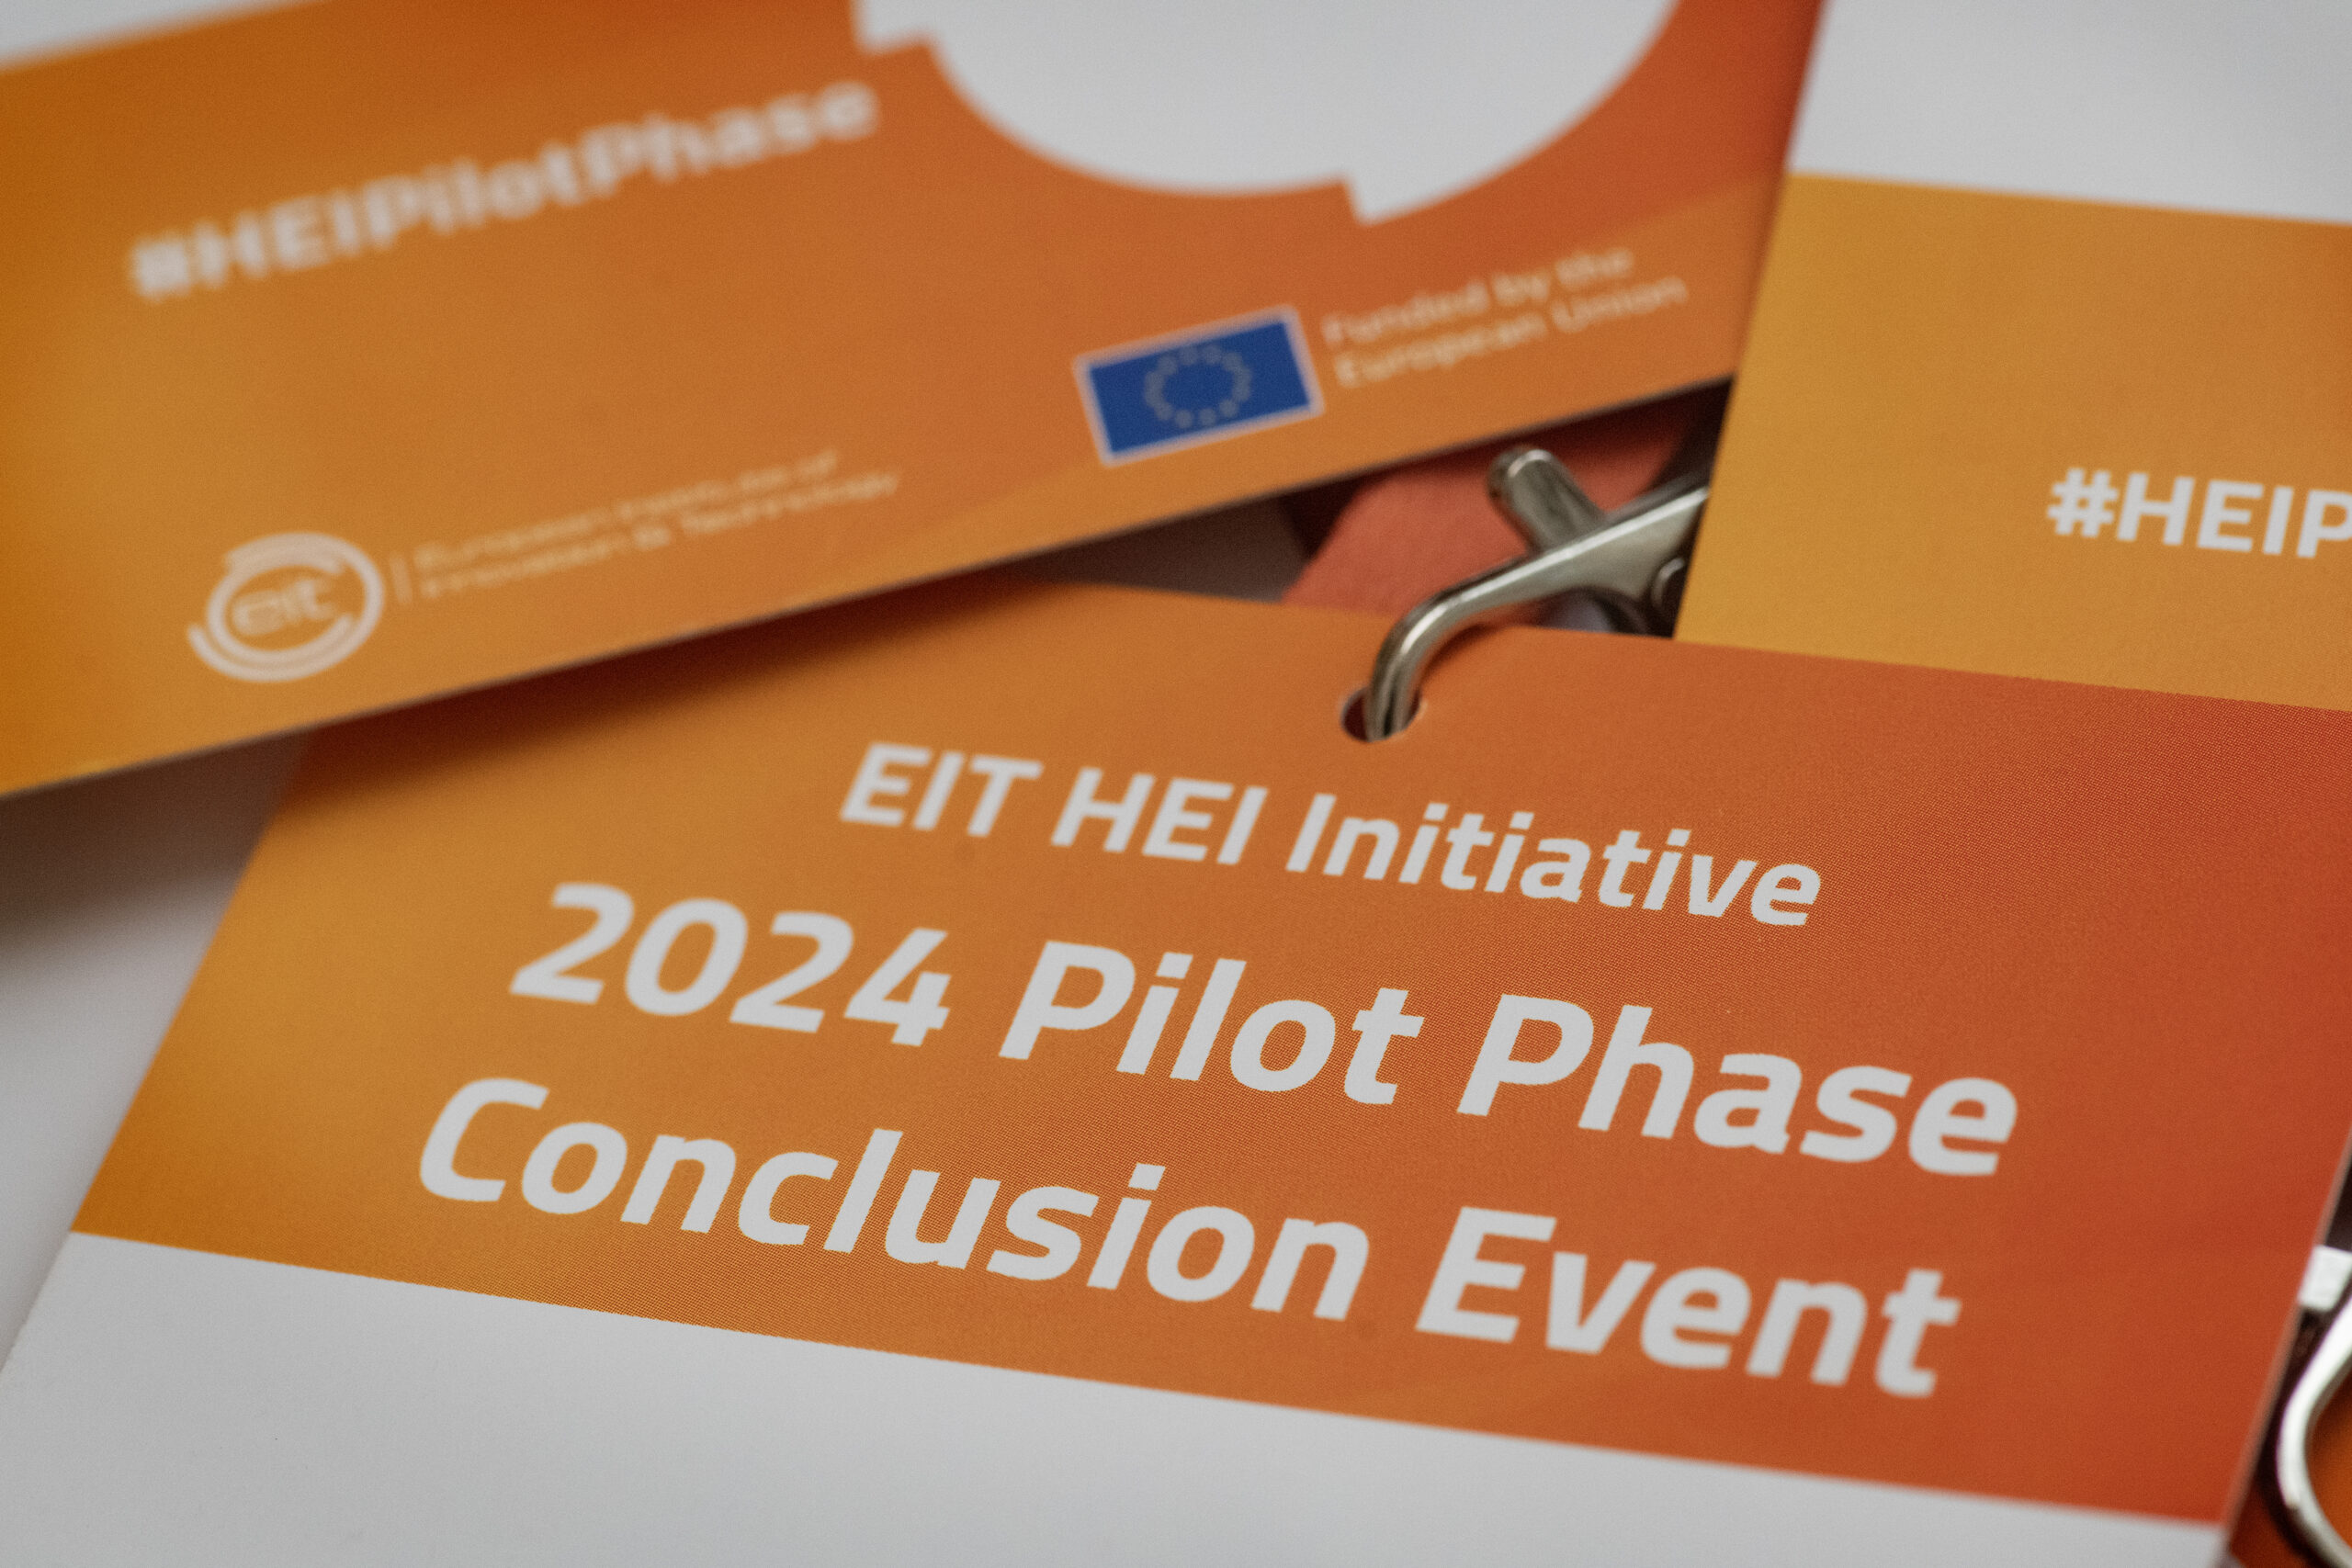 Summary of the 2024 Pilot Phase Conclusion Event